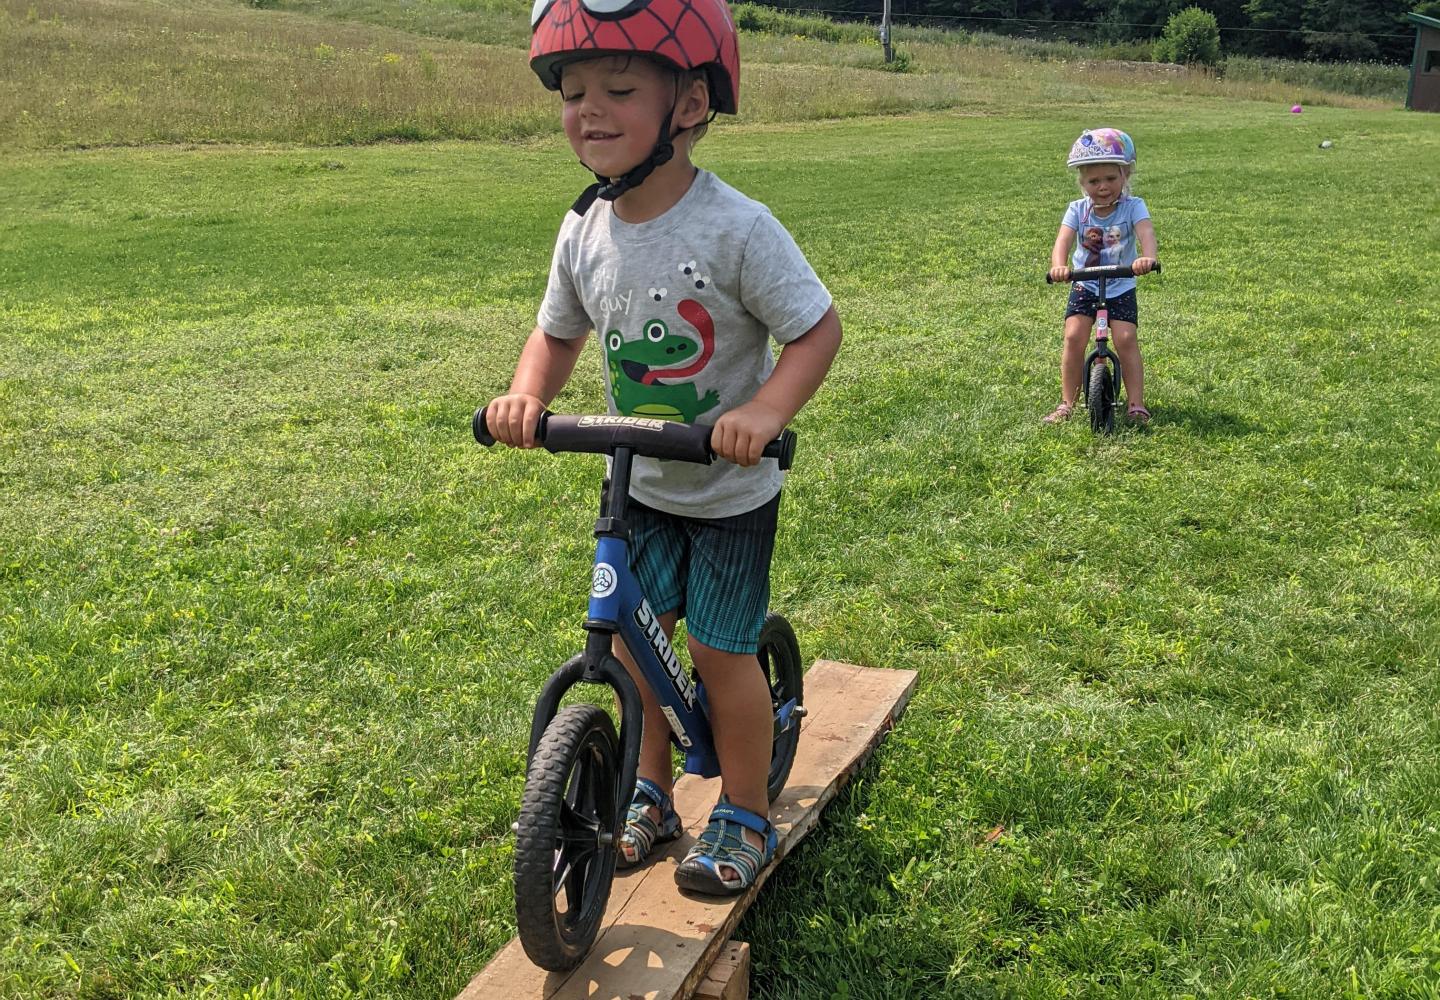 Fun for all ages and skill levels at Pisgah Pedalfest.